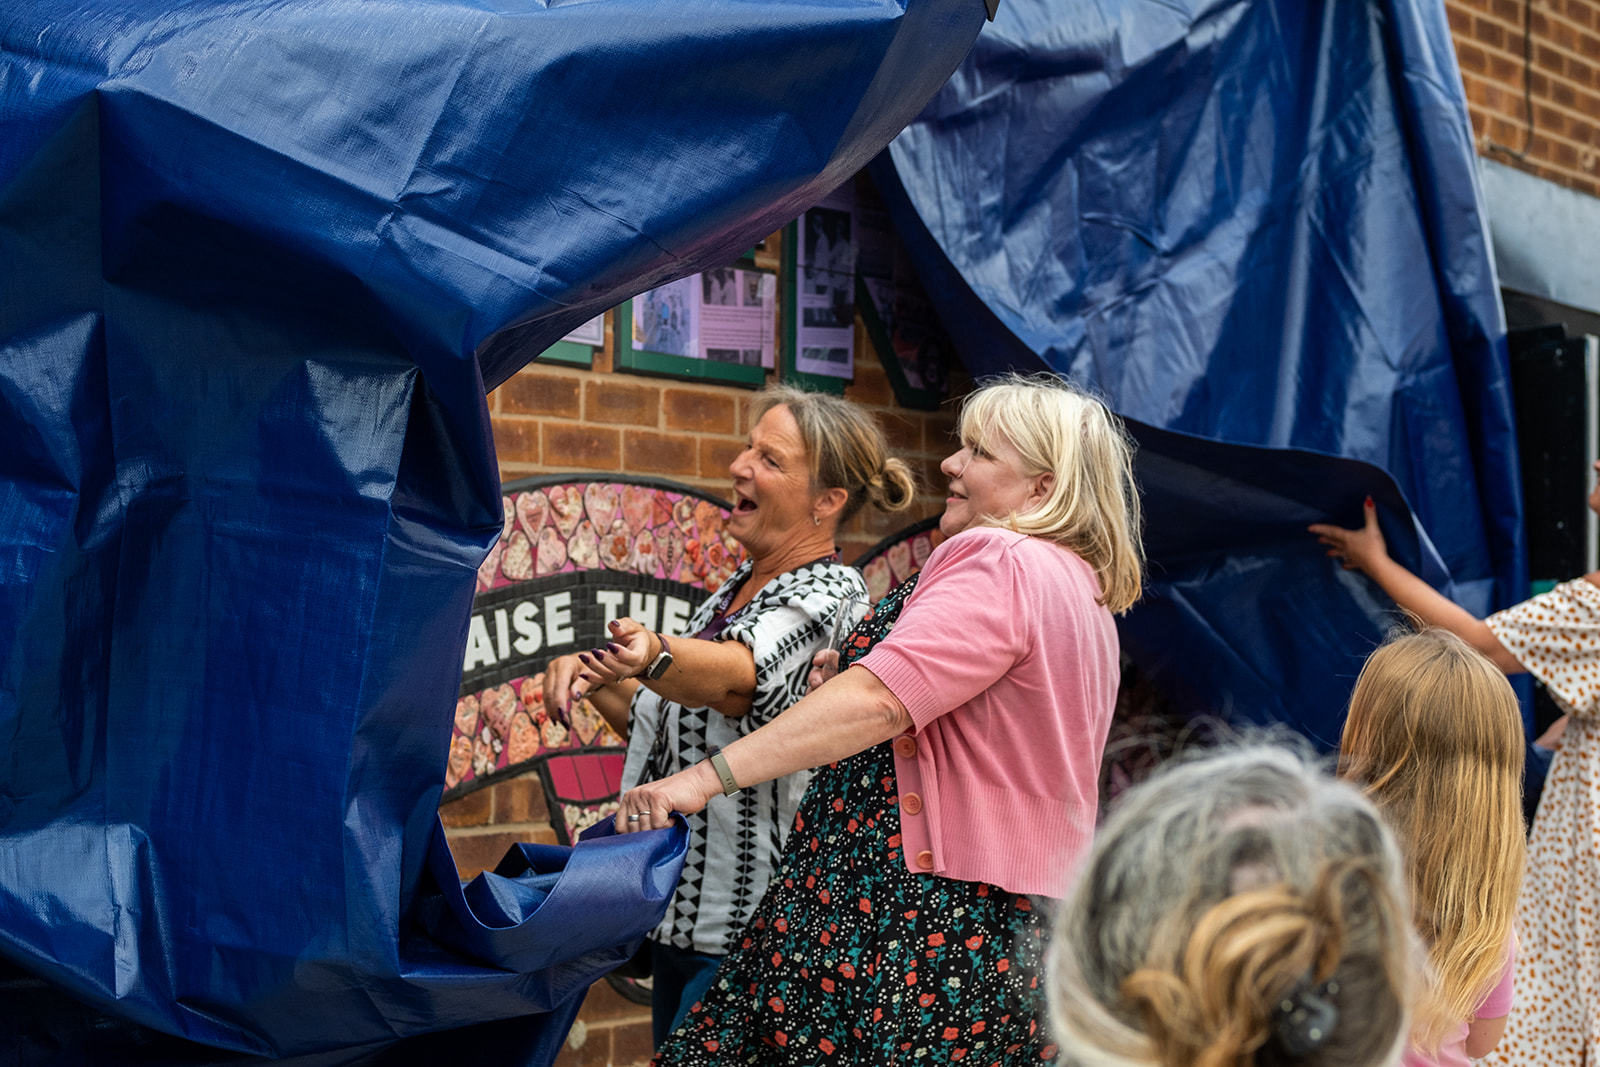 Carrie and a member of the St Helens community tear away the dark blue tarpaulin to reveal the mural.